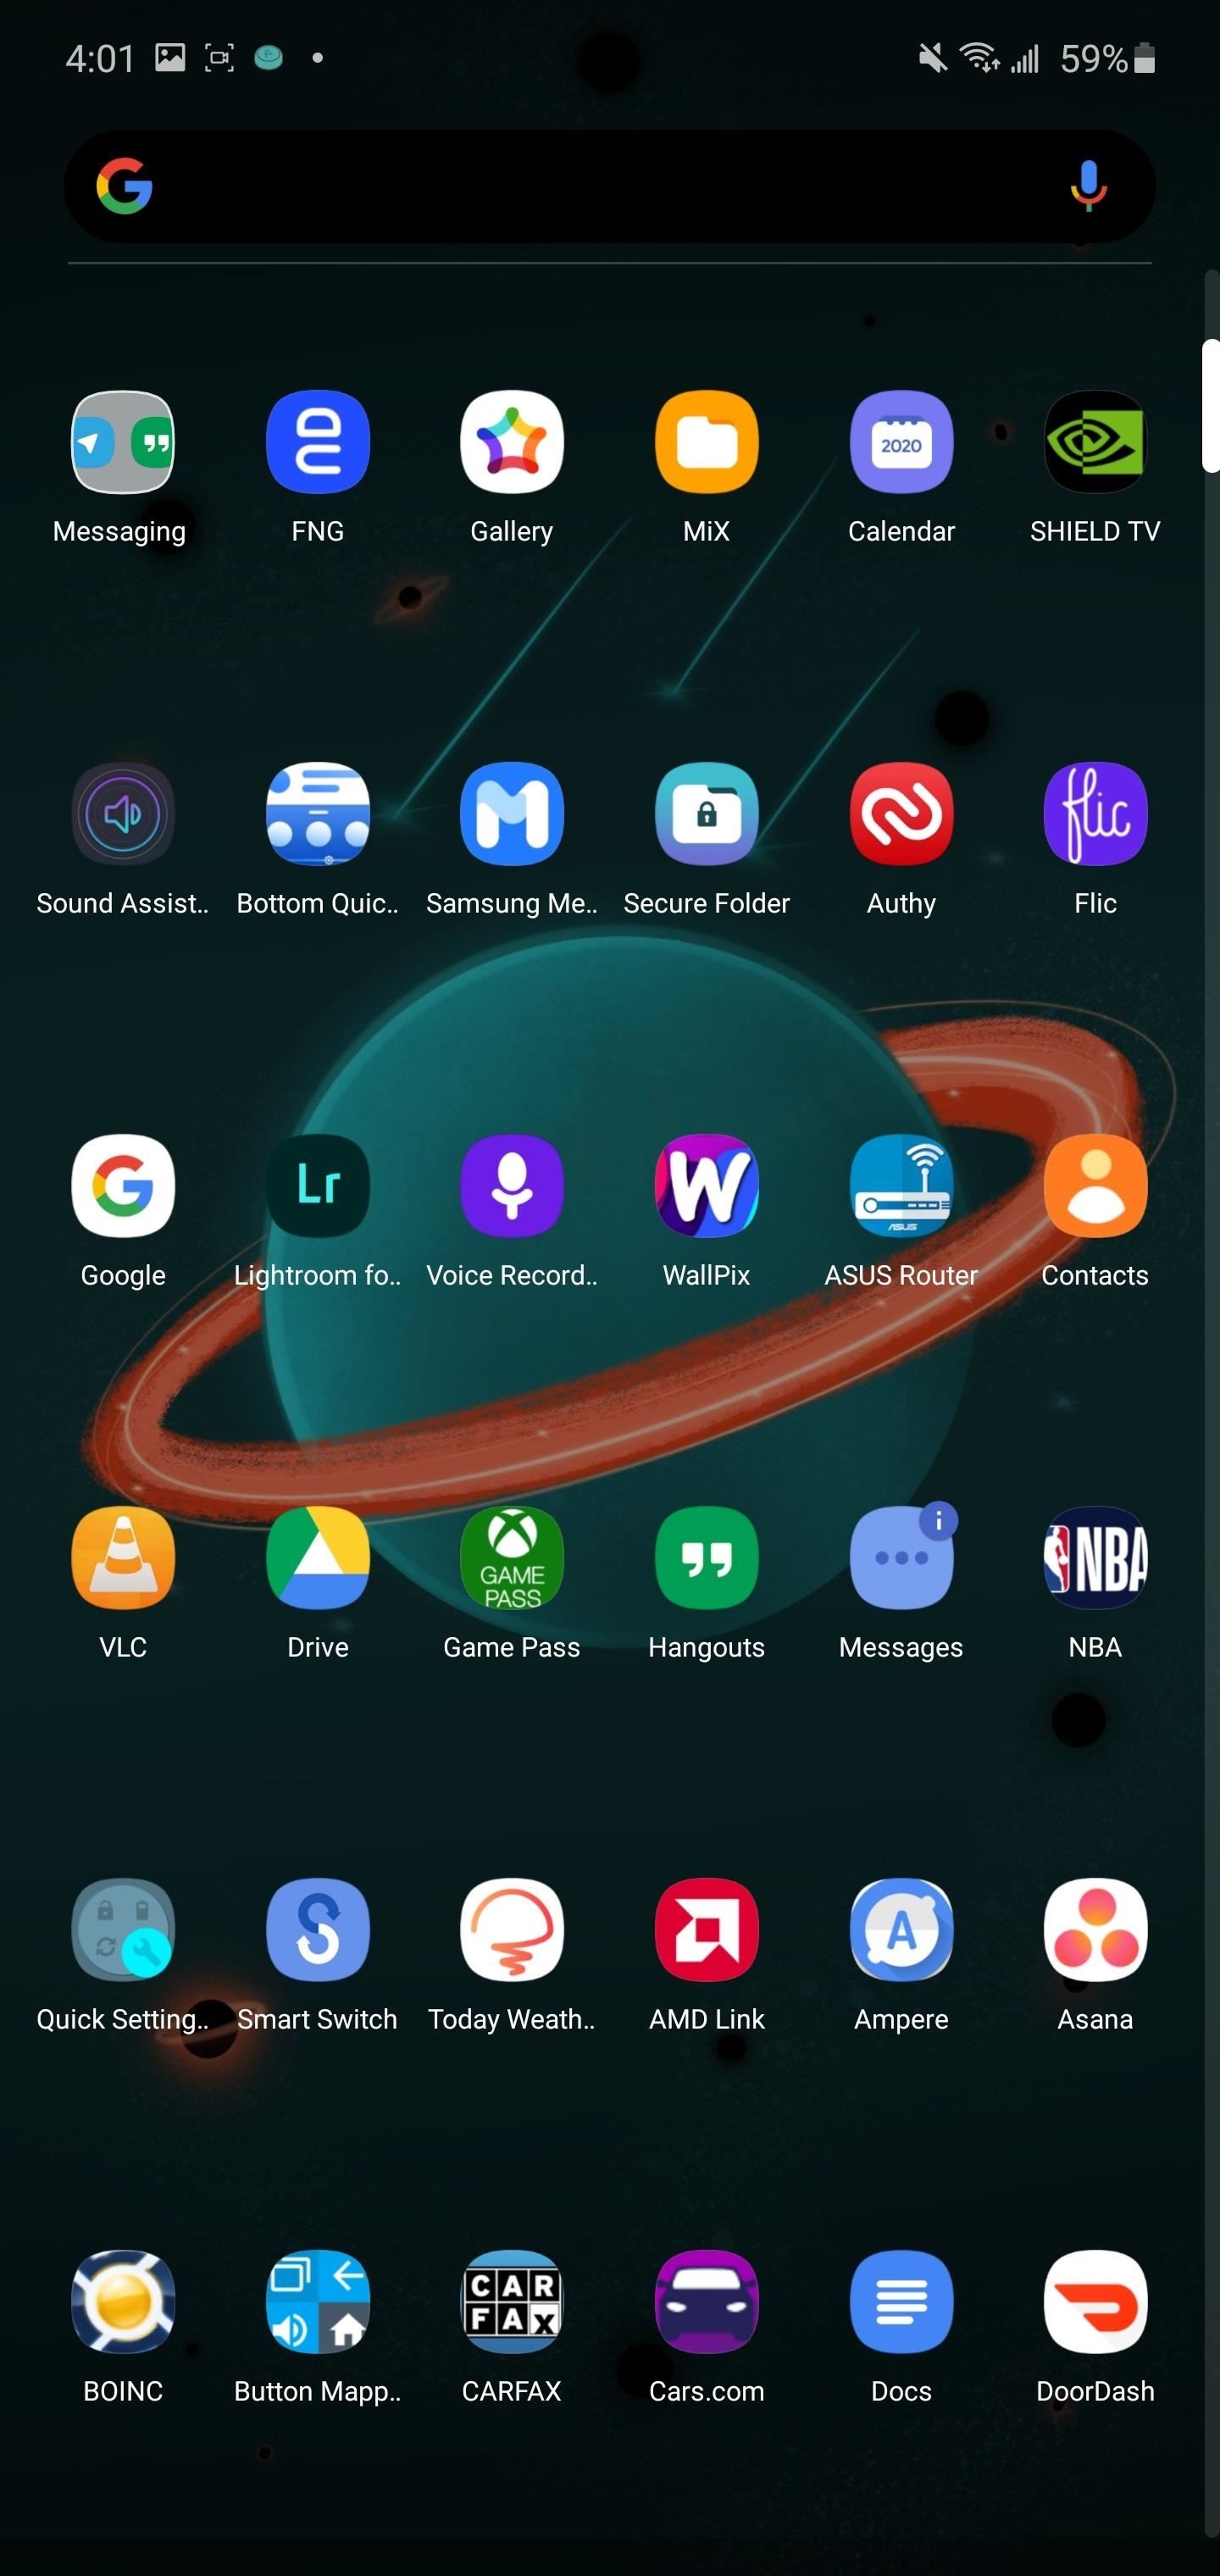 Action Launcher 101: How to Change the Icon Pack for a Custom Look